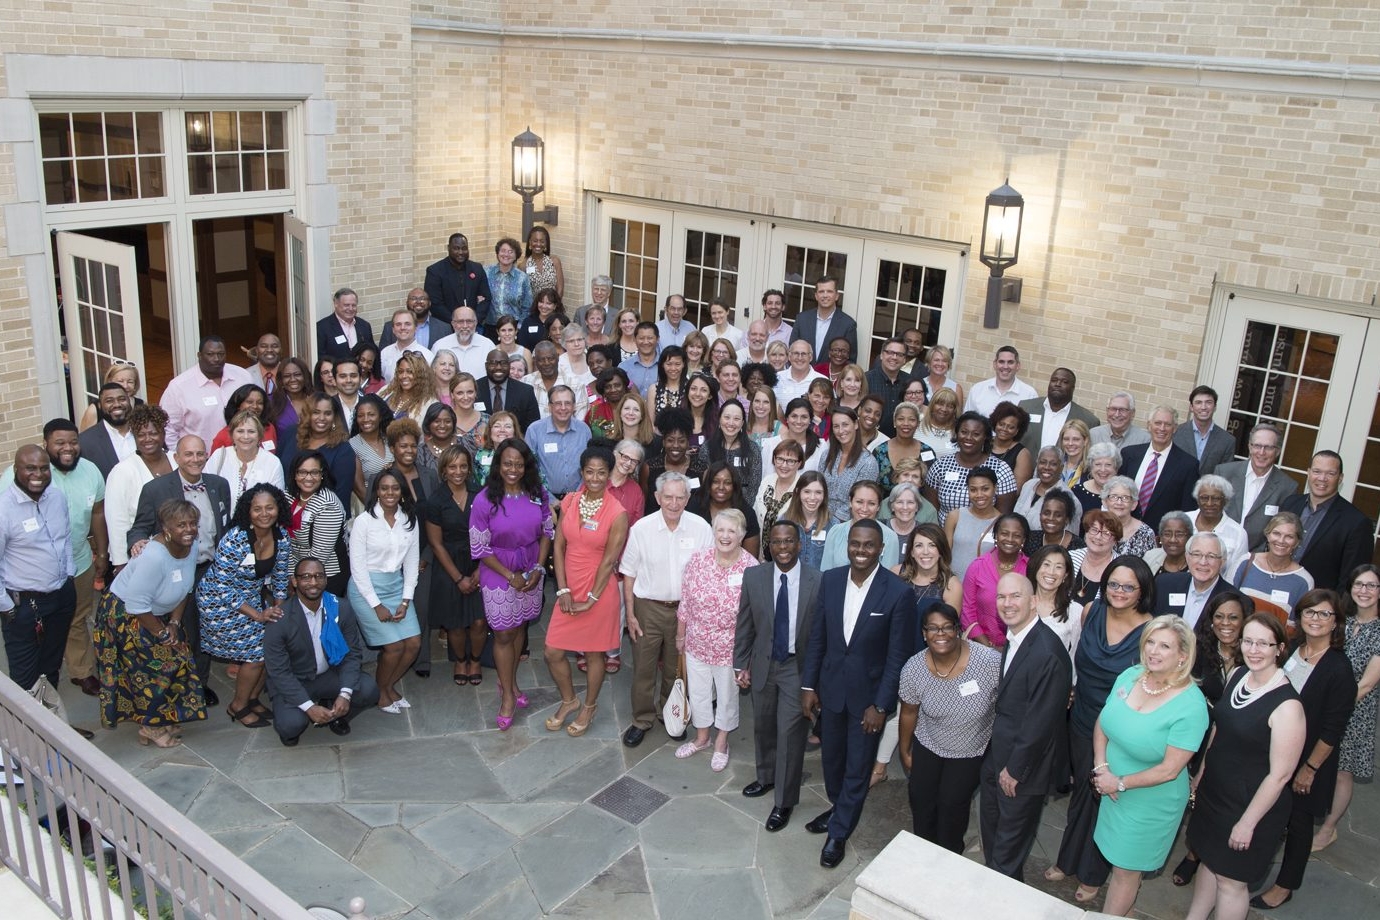 Together We Dine June 2017 Dallas, TX attendees